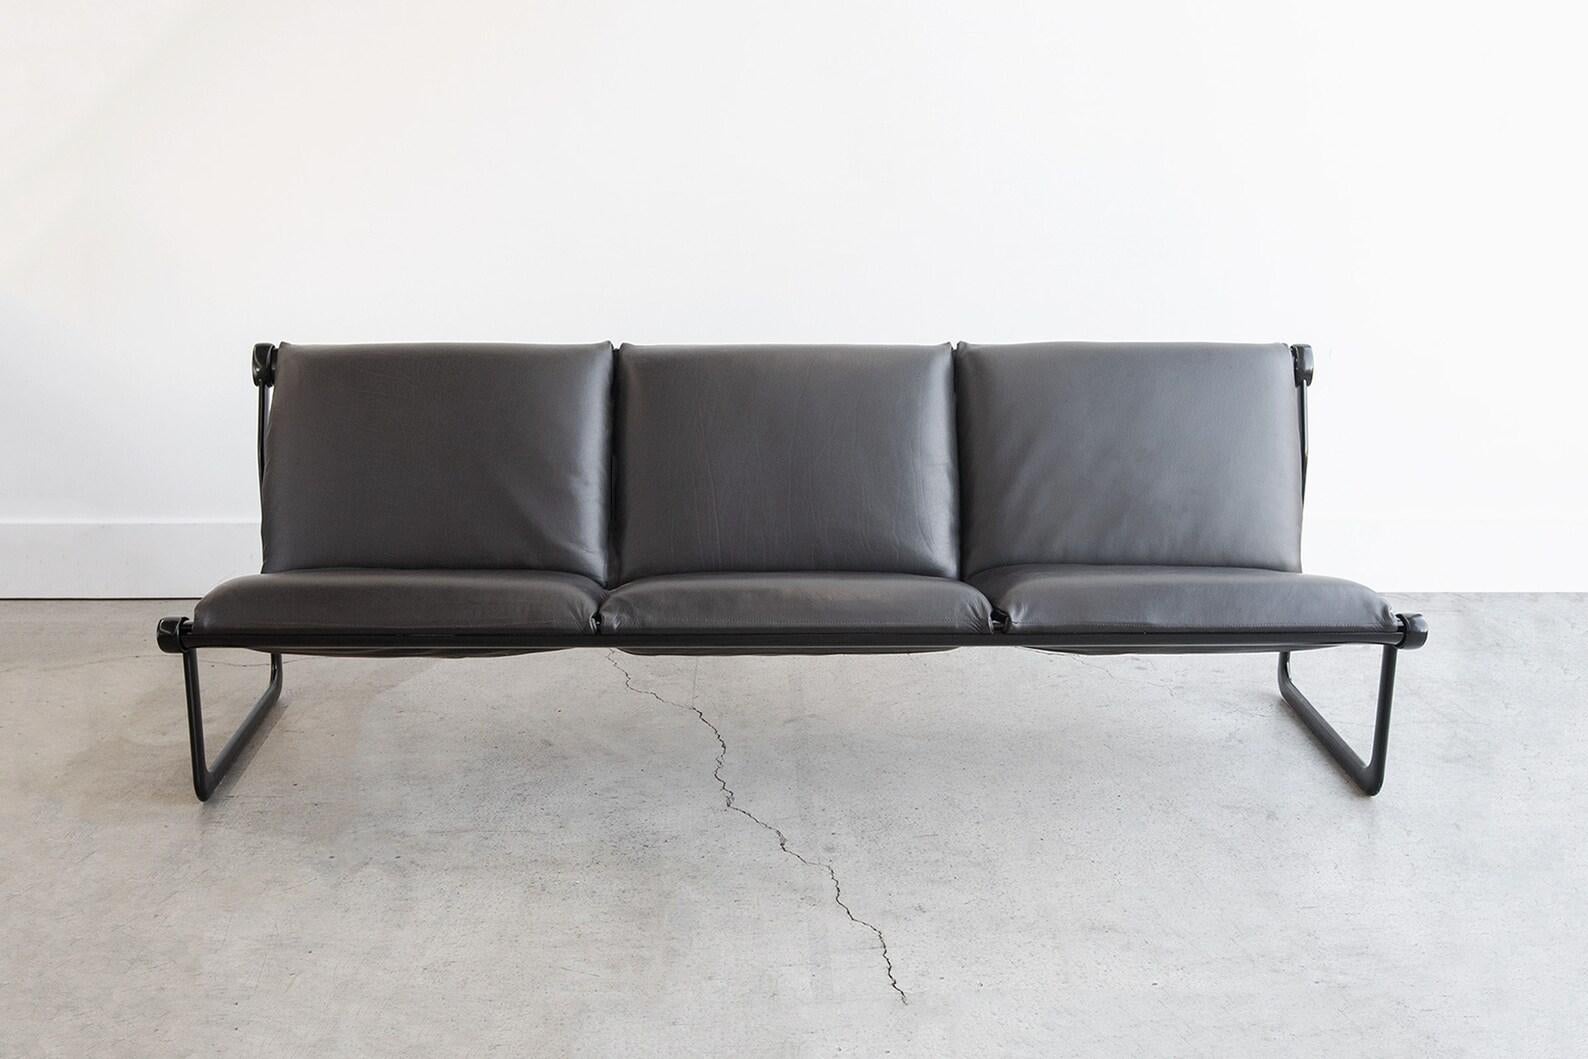 Ultra-rare aluminum sling 3 seat sofa designed by Bruce Hannah and Andrew Morrison for Knoll. This design team worked together at Knoll throughout the 1970s and won numerous design awards! Super comfy sling design makes a great spot for long